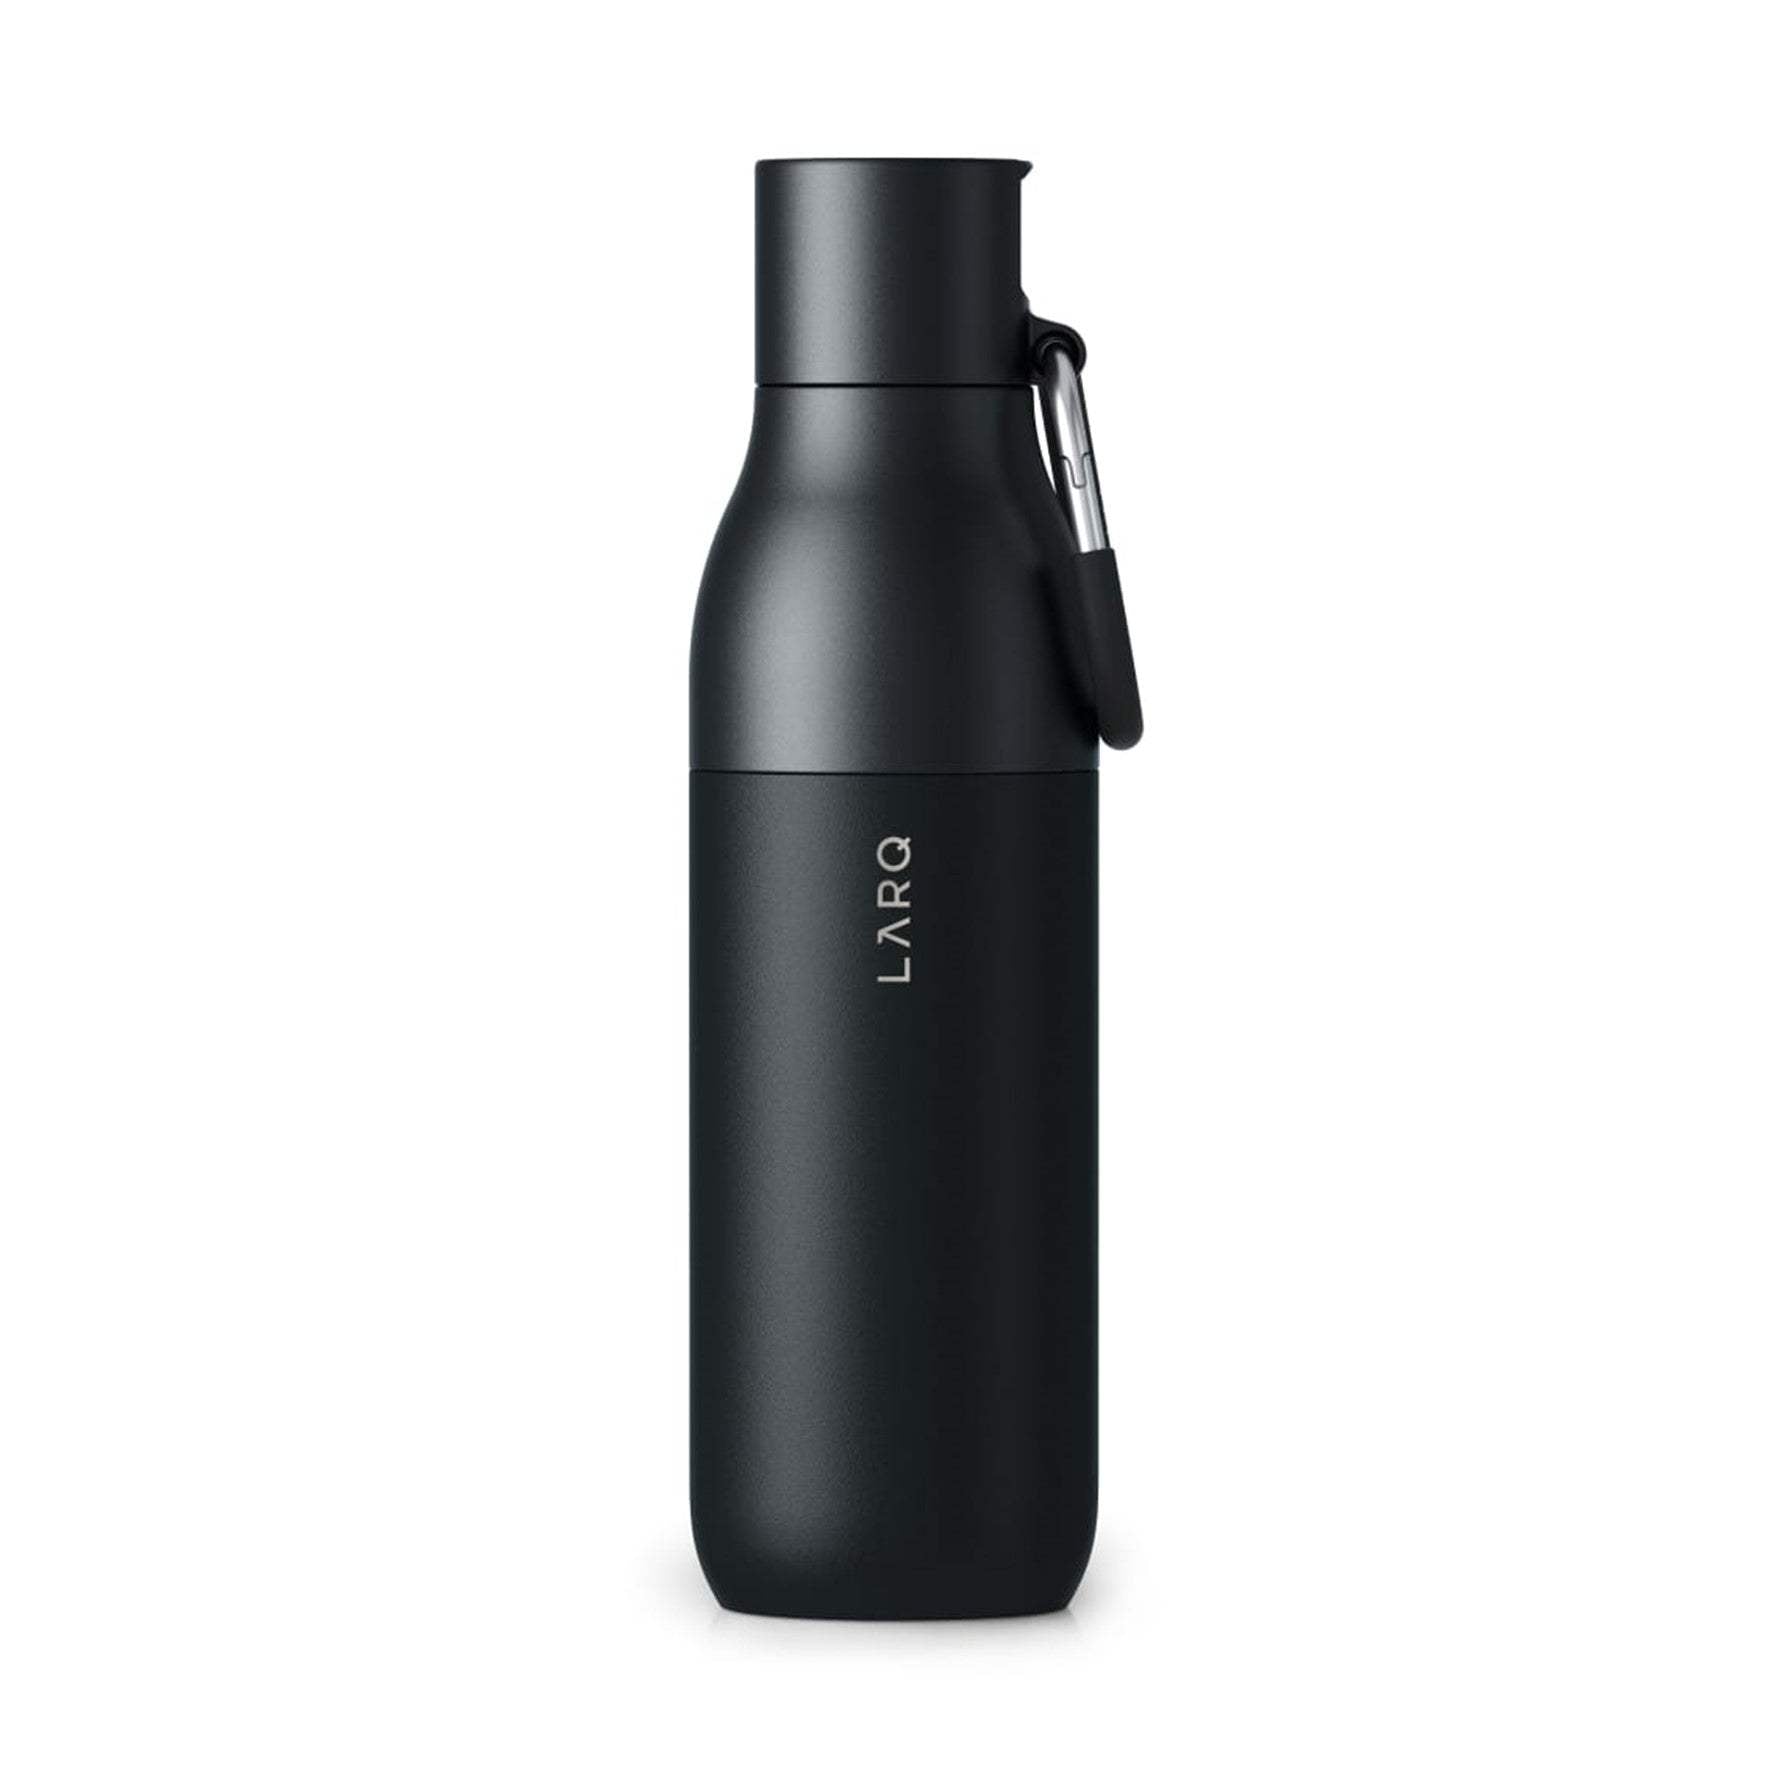 LARQ Bottle Filtered 740ml - The Luxury Promotional Gifts Company Limited